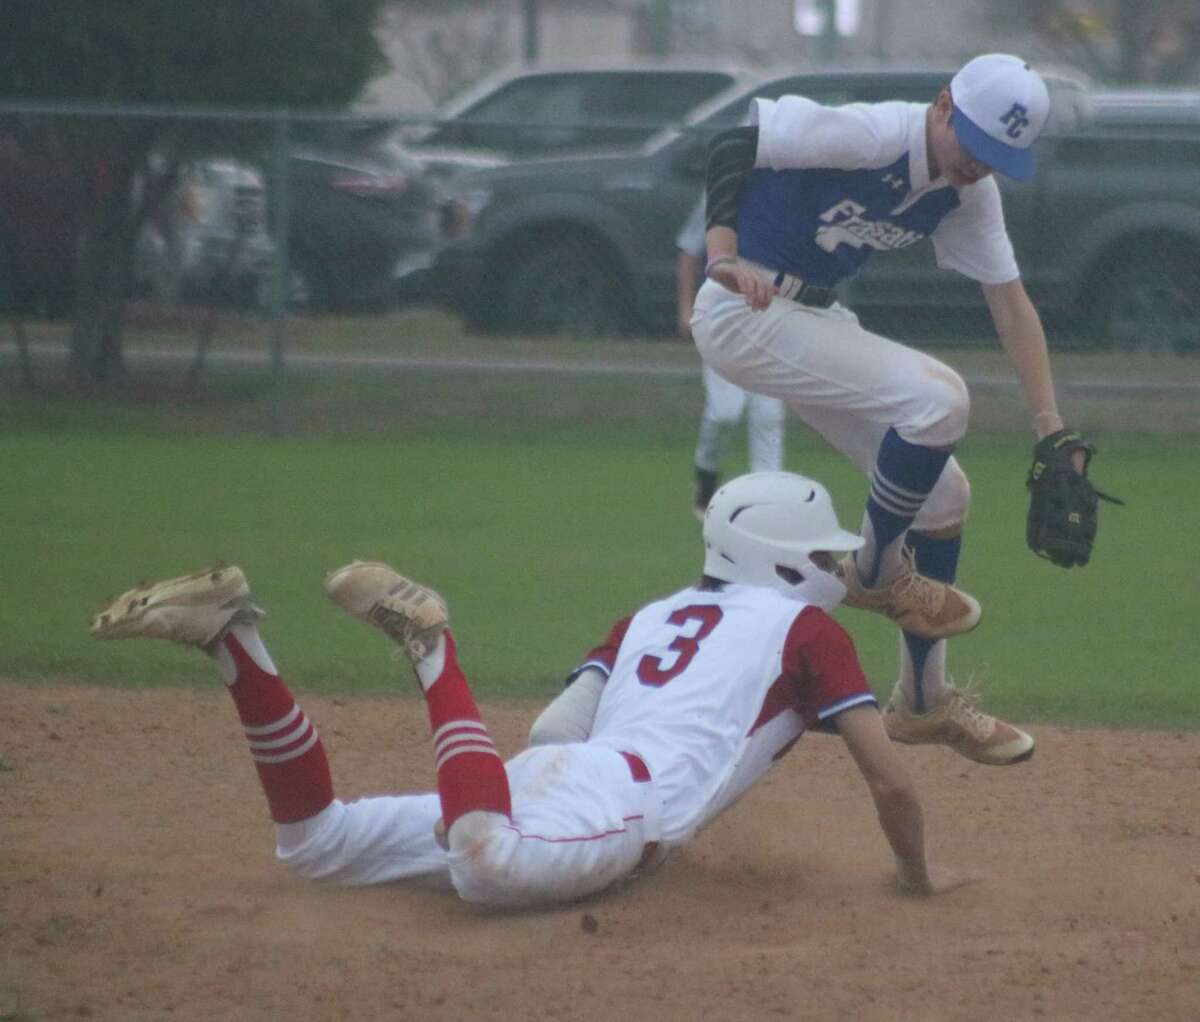 Pasadena-FBCA's Brayden Evans steals second base in the fifth inning, but he went no further as the Warriors stranded three potential go-ahead runs on the bases over their last two at-bats.